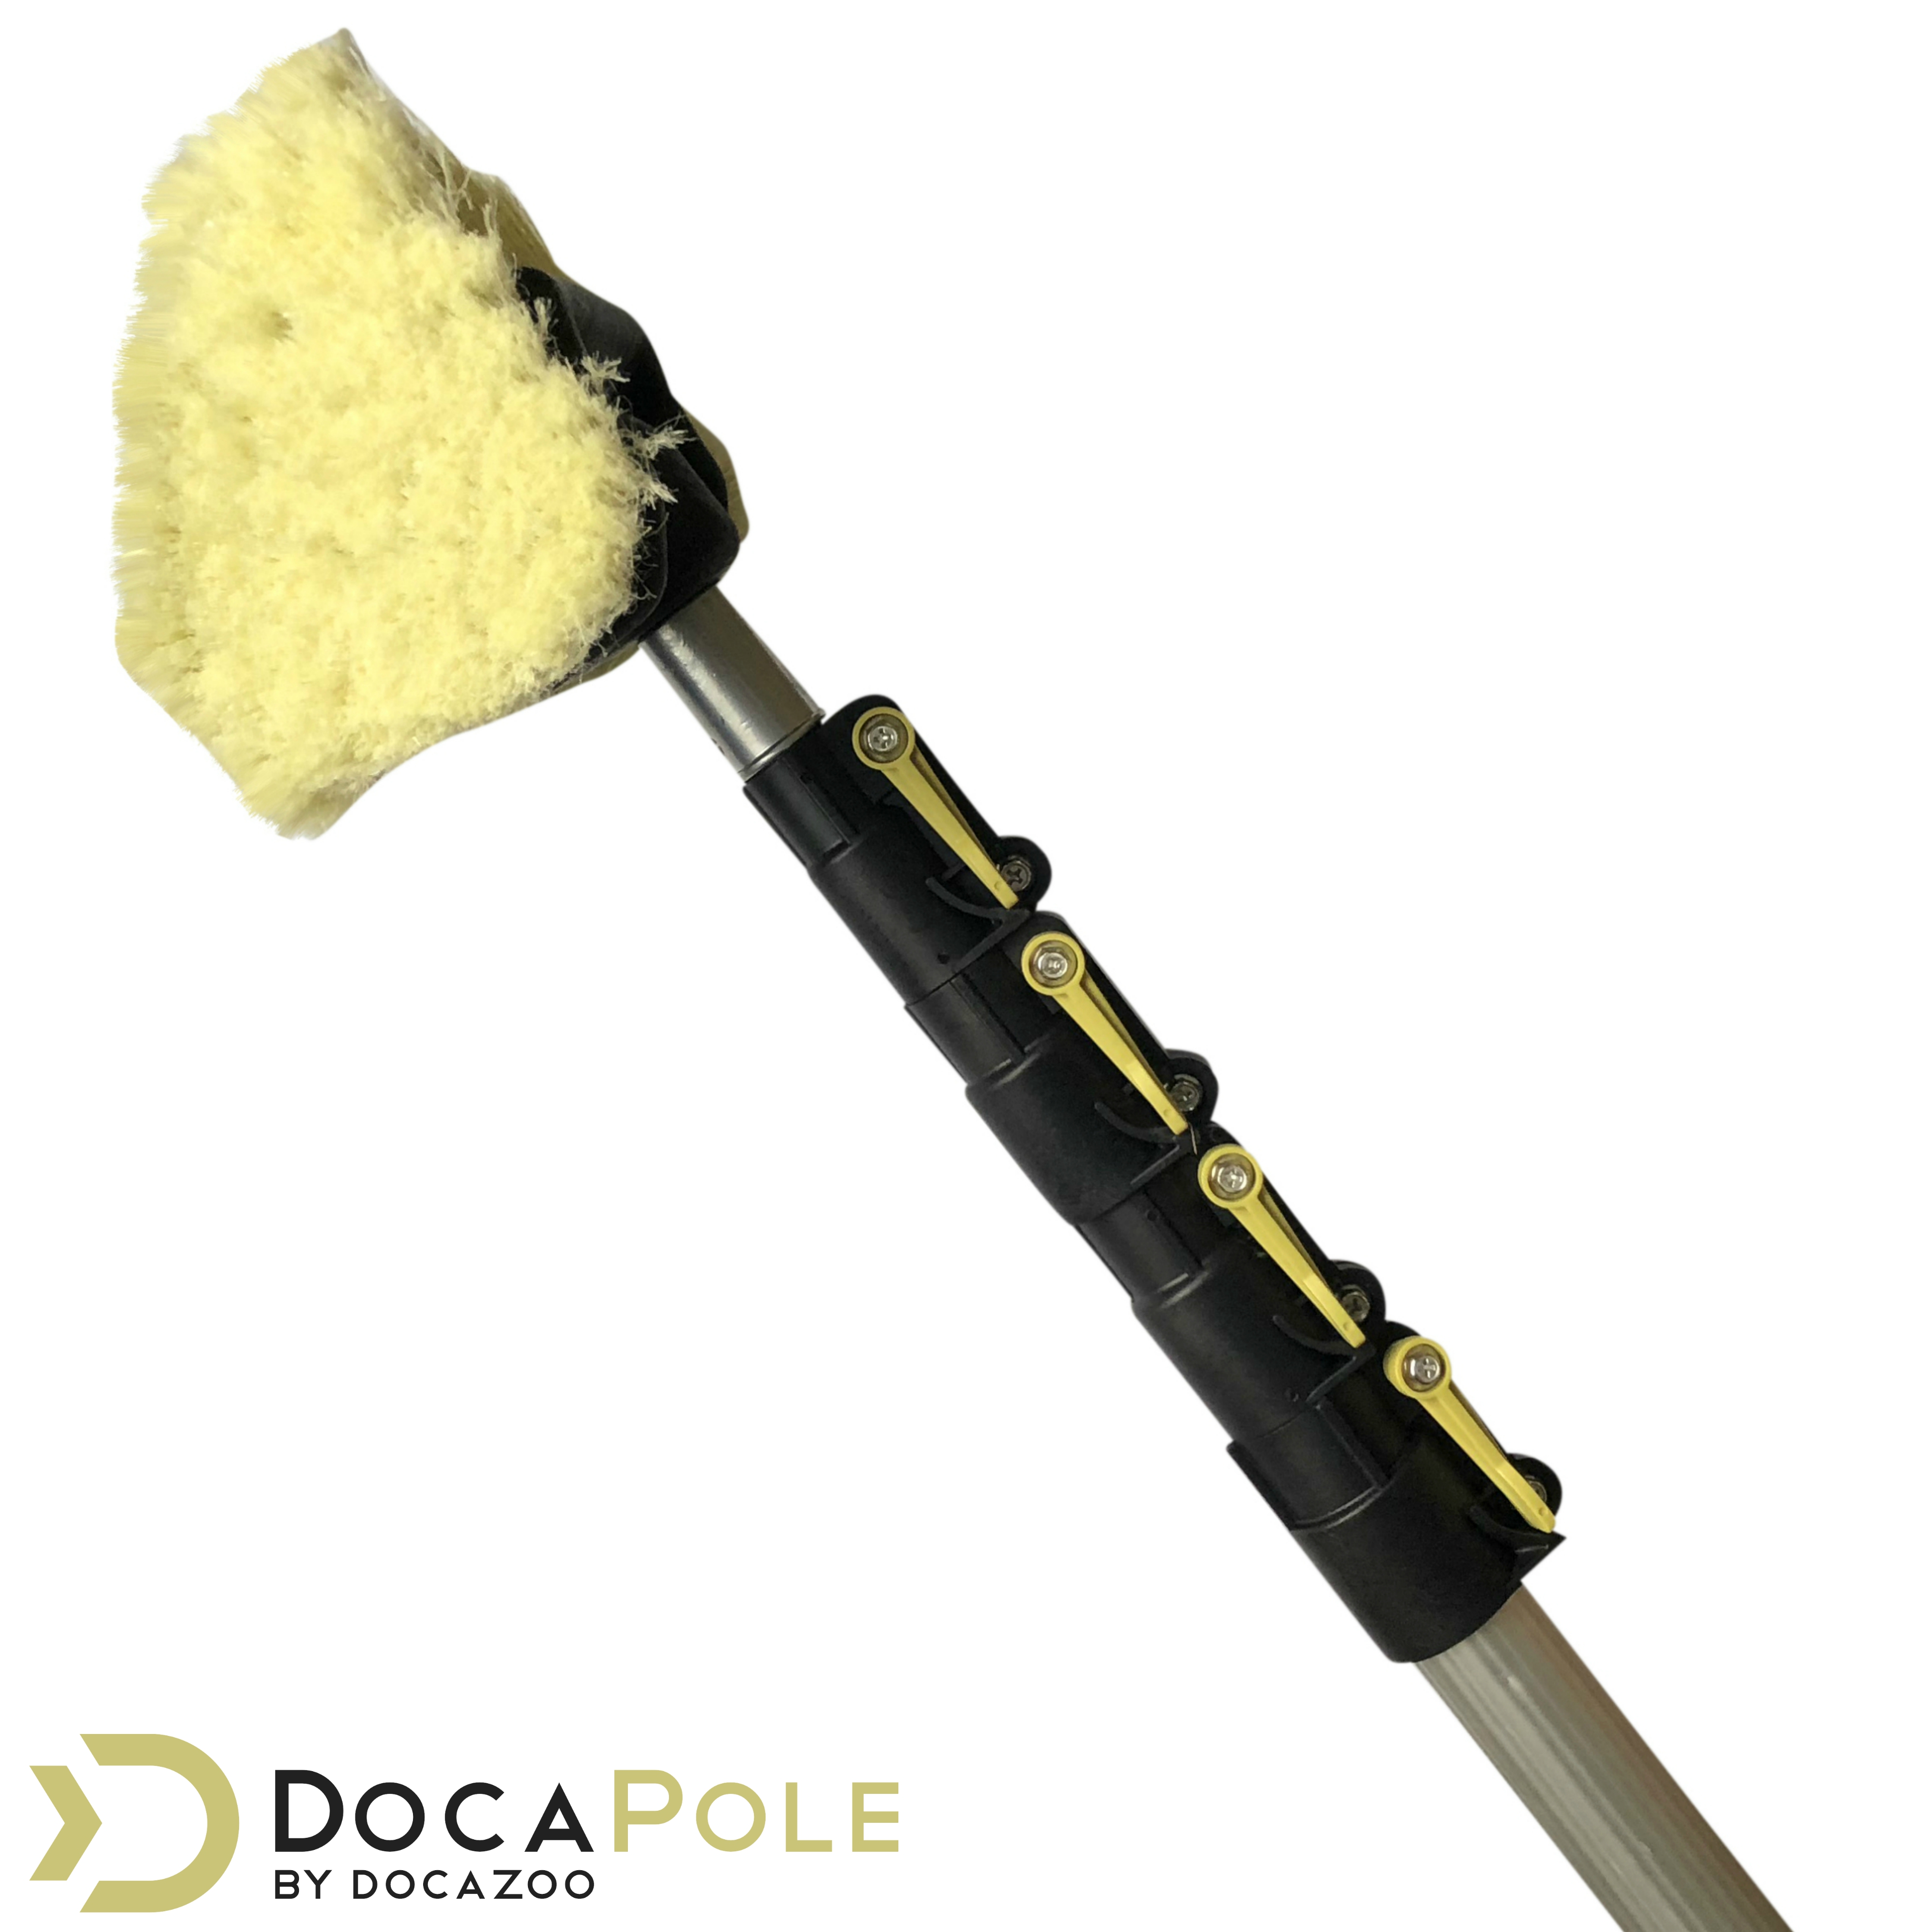 DocaPole 6-24' Soft Bristle Car Wash Brush & Extension Pole |11" Scrub Brush with 12 Foot Handle | Long-Reach Cleaning Brush and Deck Brush for Car, Truck, Boat, RV, House Siding, Floor, and More - image 2 of 7